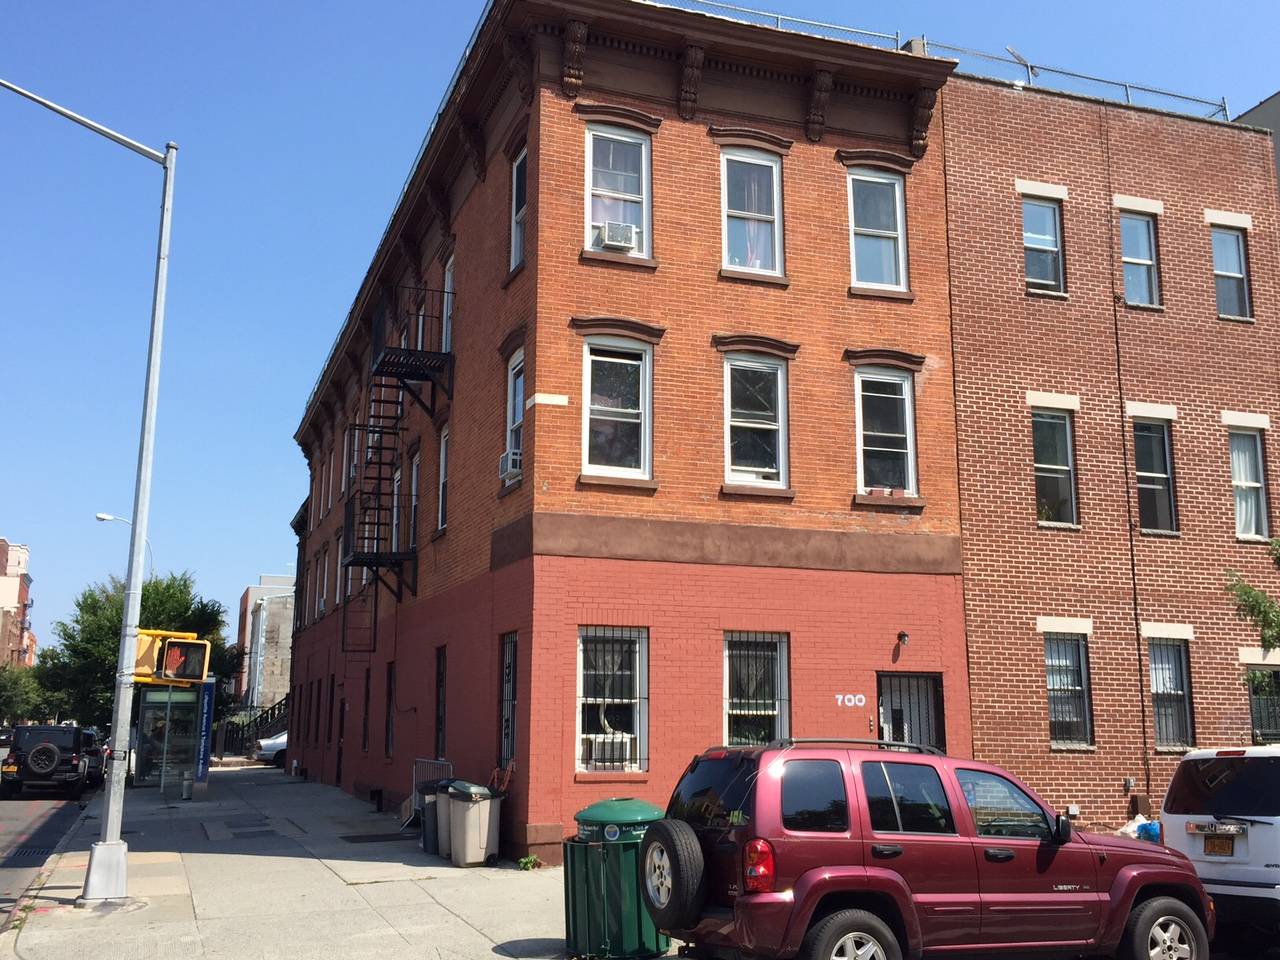 Multi Family ready for an upgrade with Park Views, G train Bedford Nostrand stop